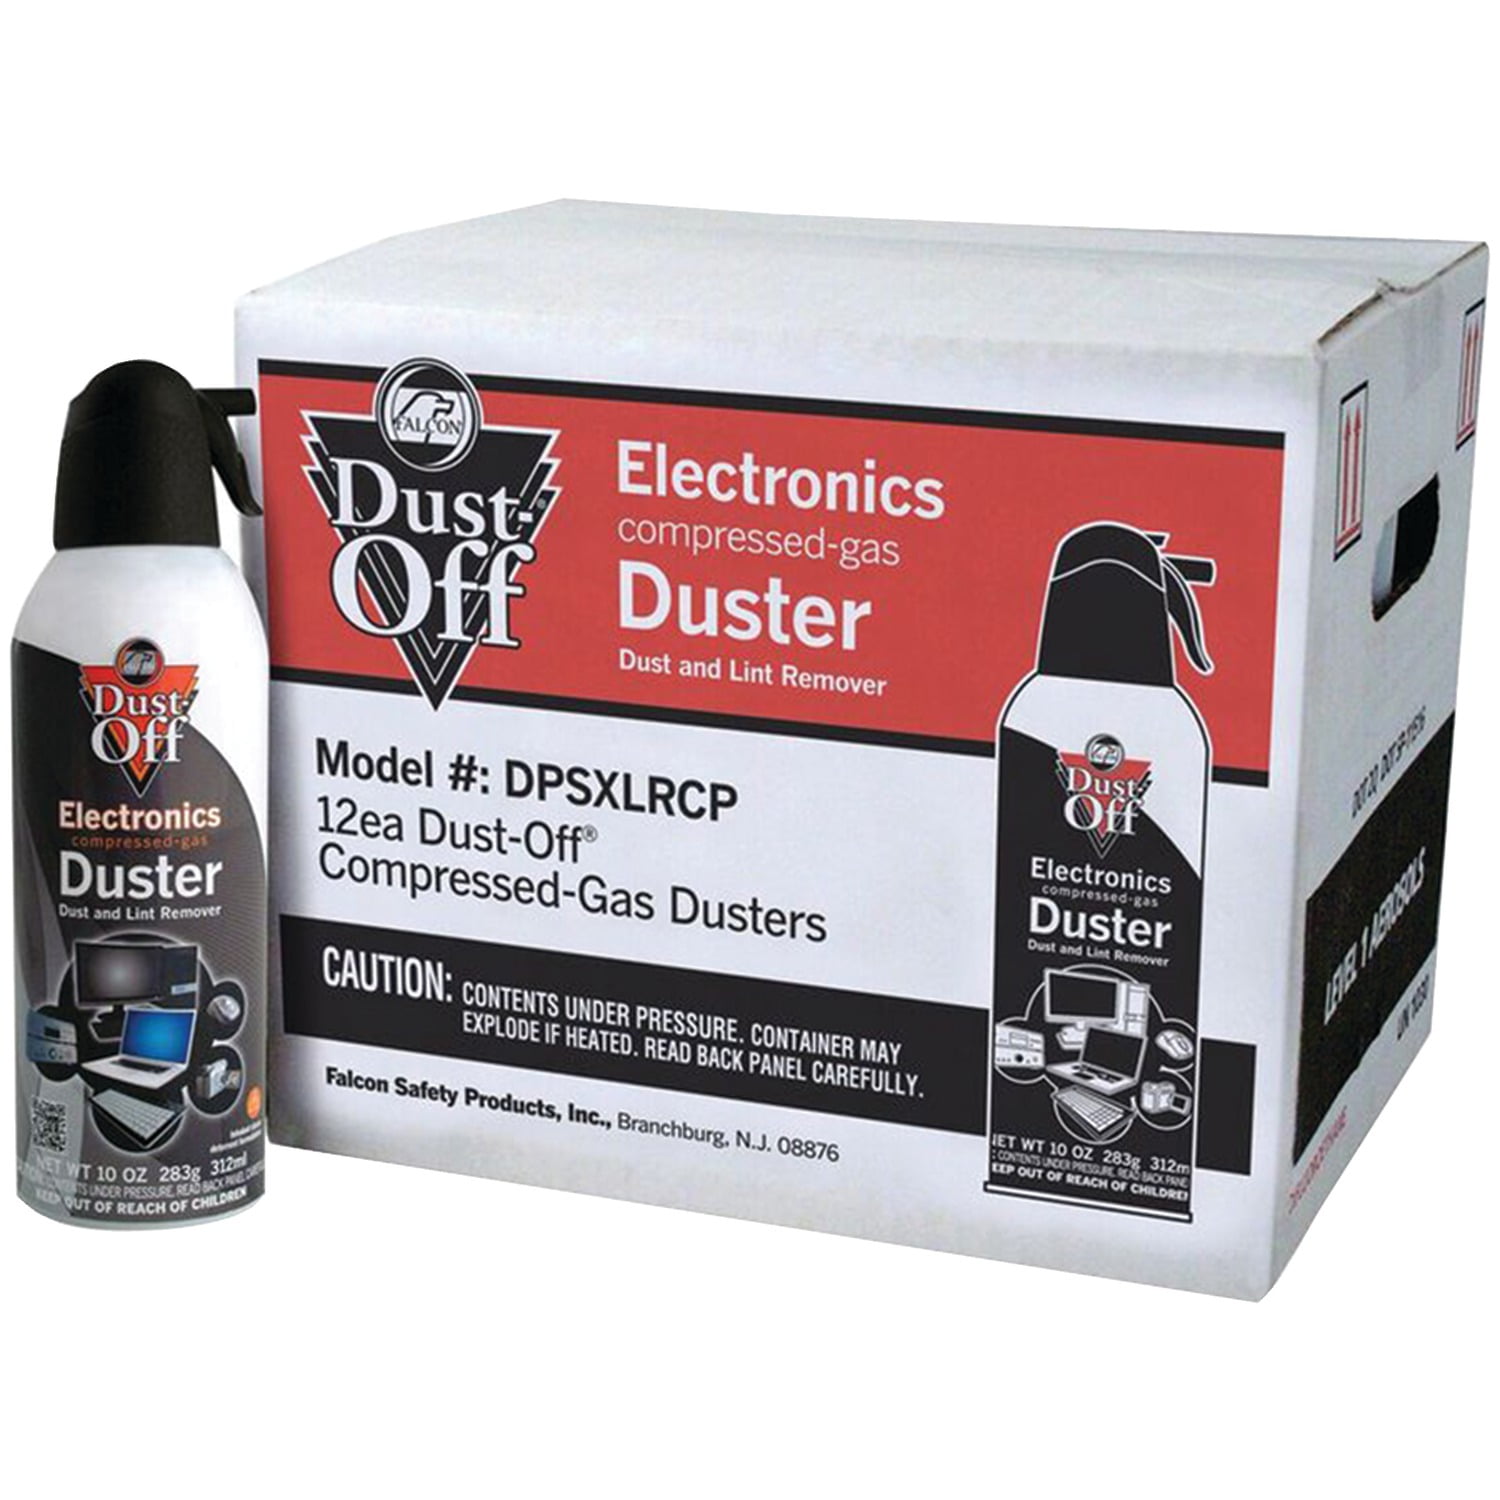 Office Depot Brand Cleaning Duster 10 Oz Pack of 3 Cans - Office Depot